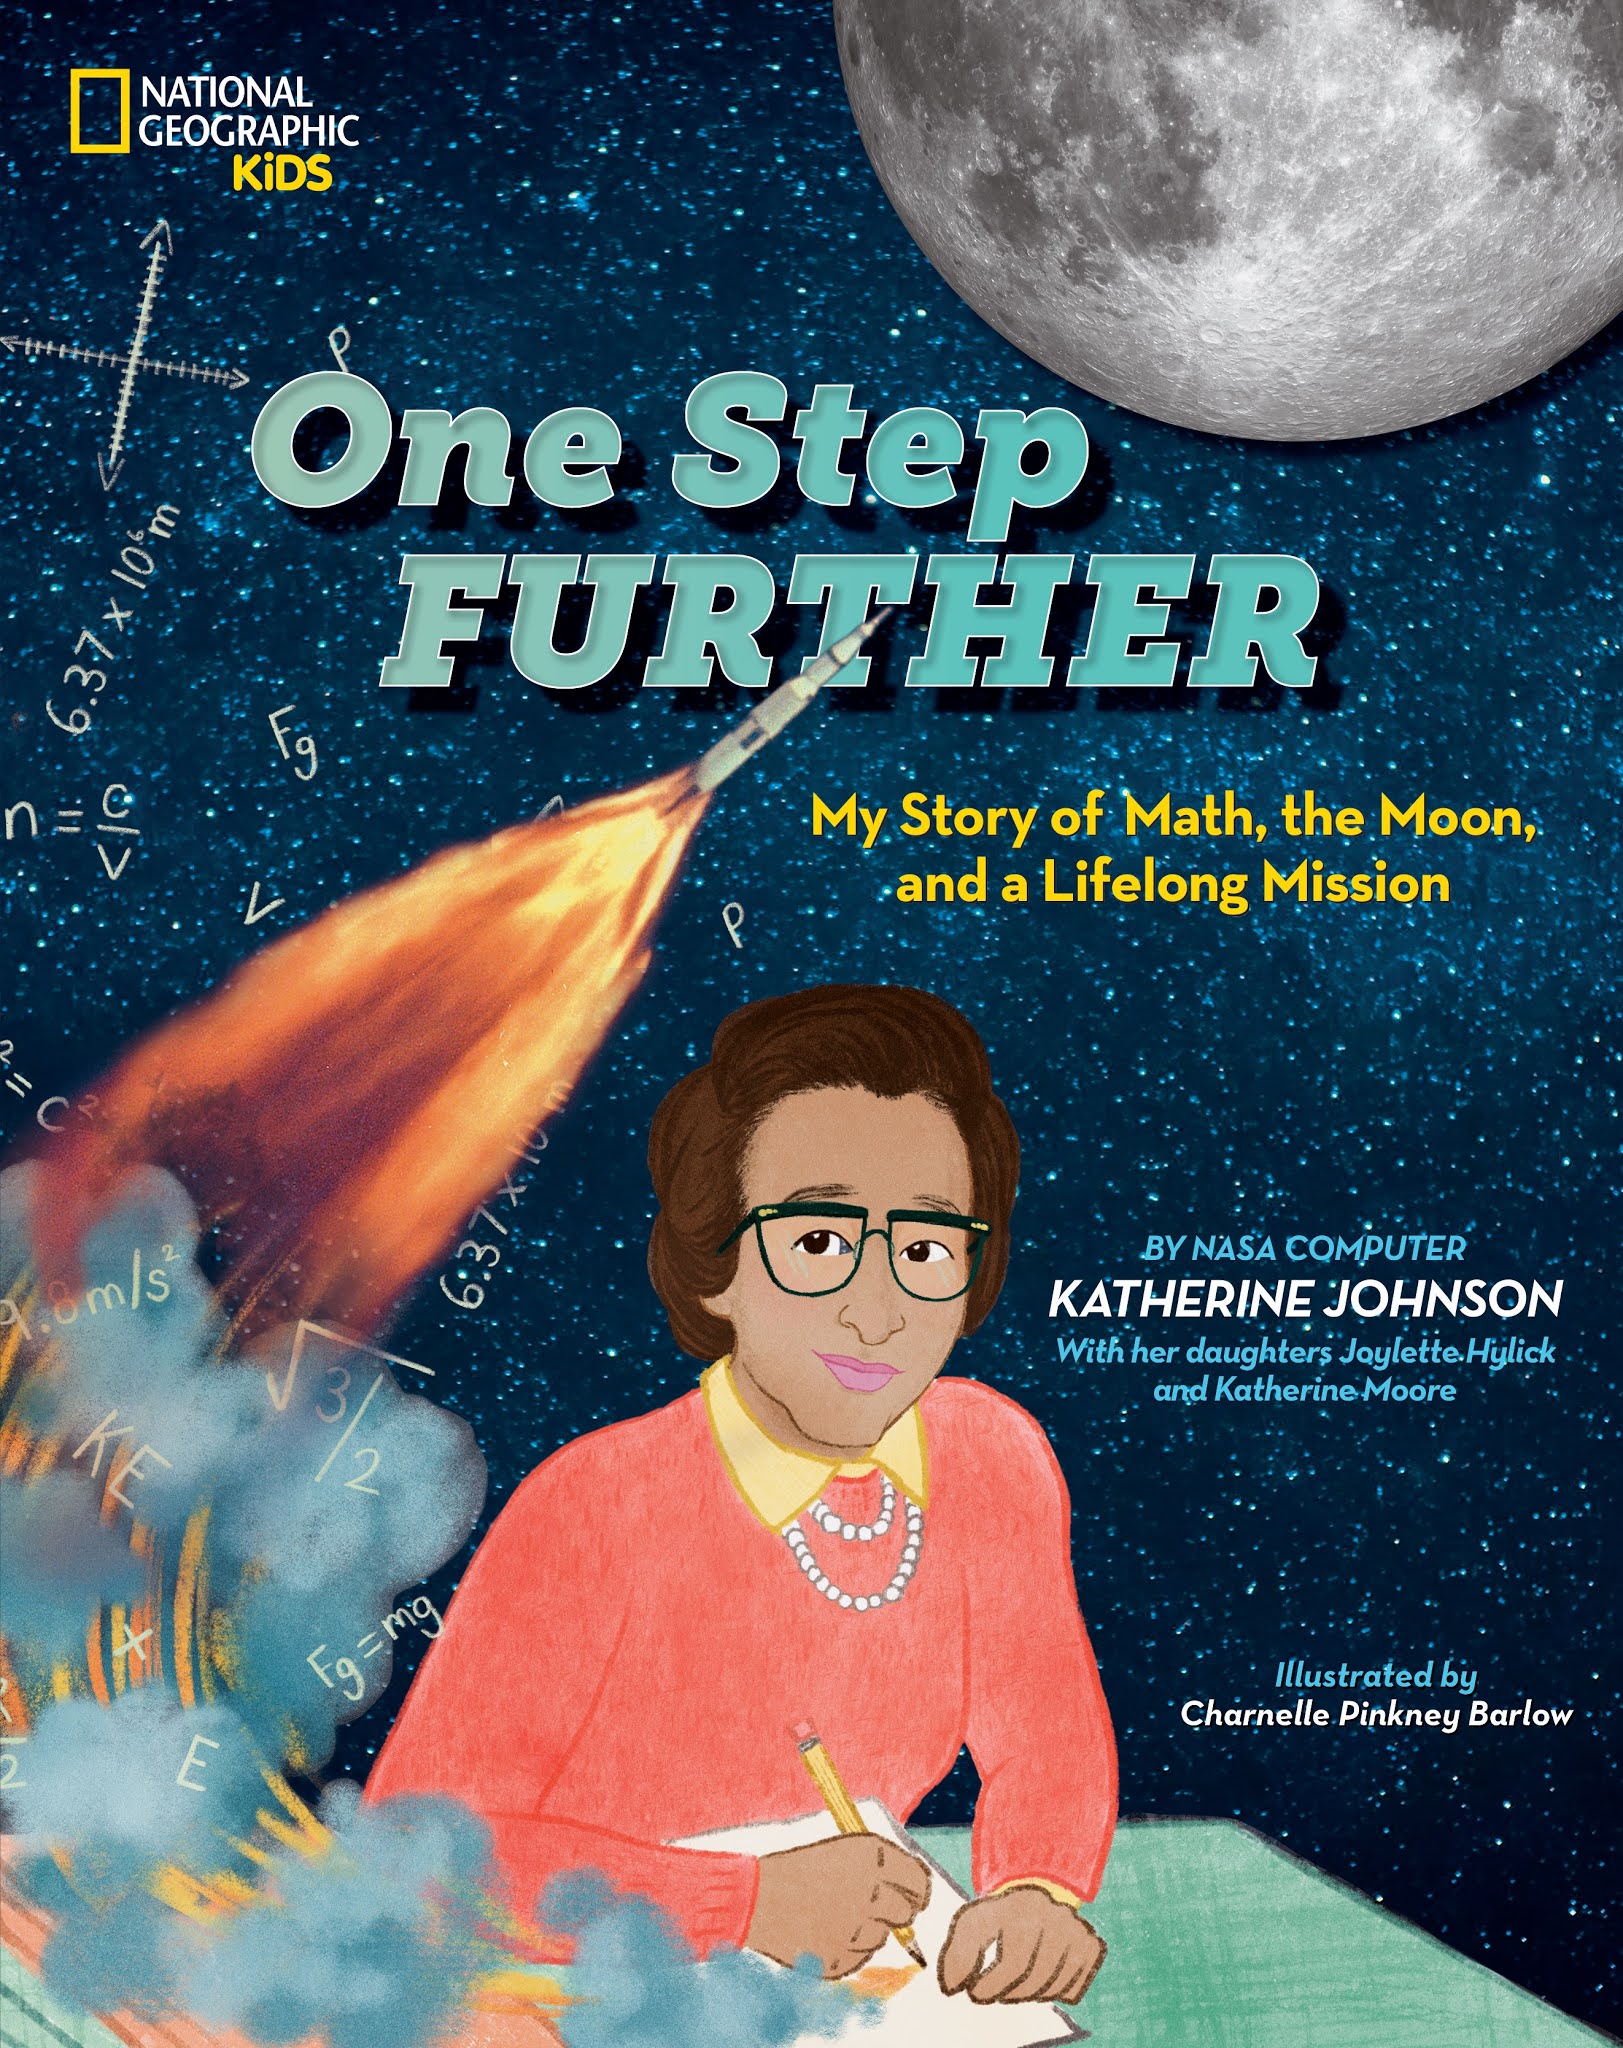 feit emulsie winkel One Step Further: My Story of Math, the Moon, and a Lifelong Mission by  Katherine Johnson - Make A Way Media